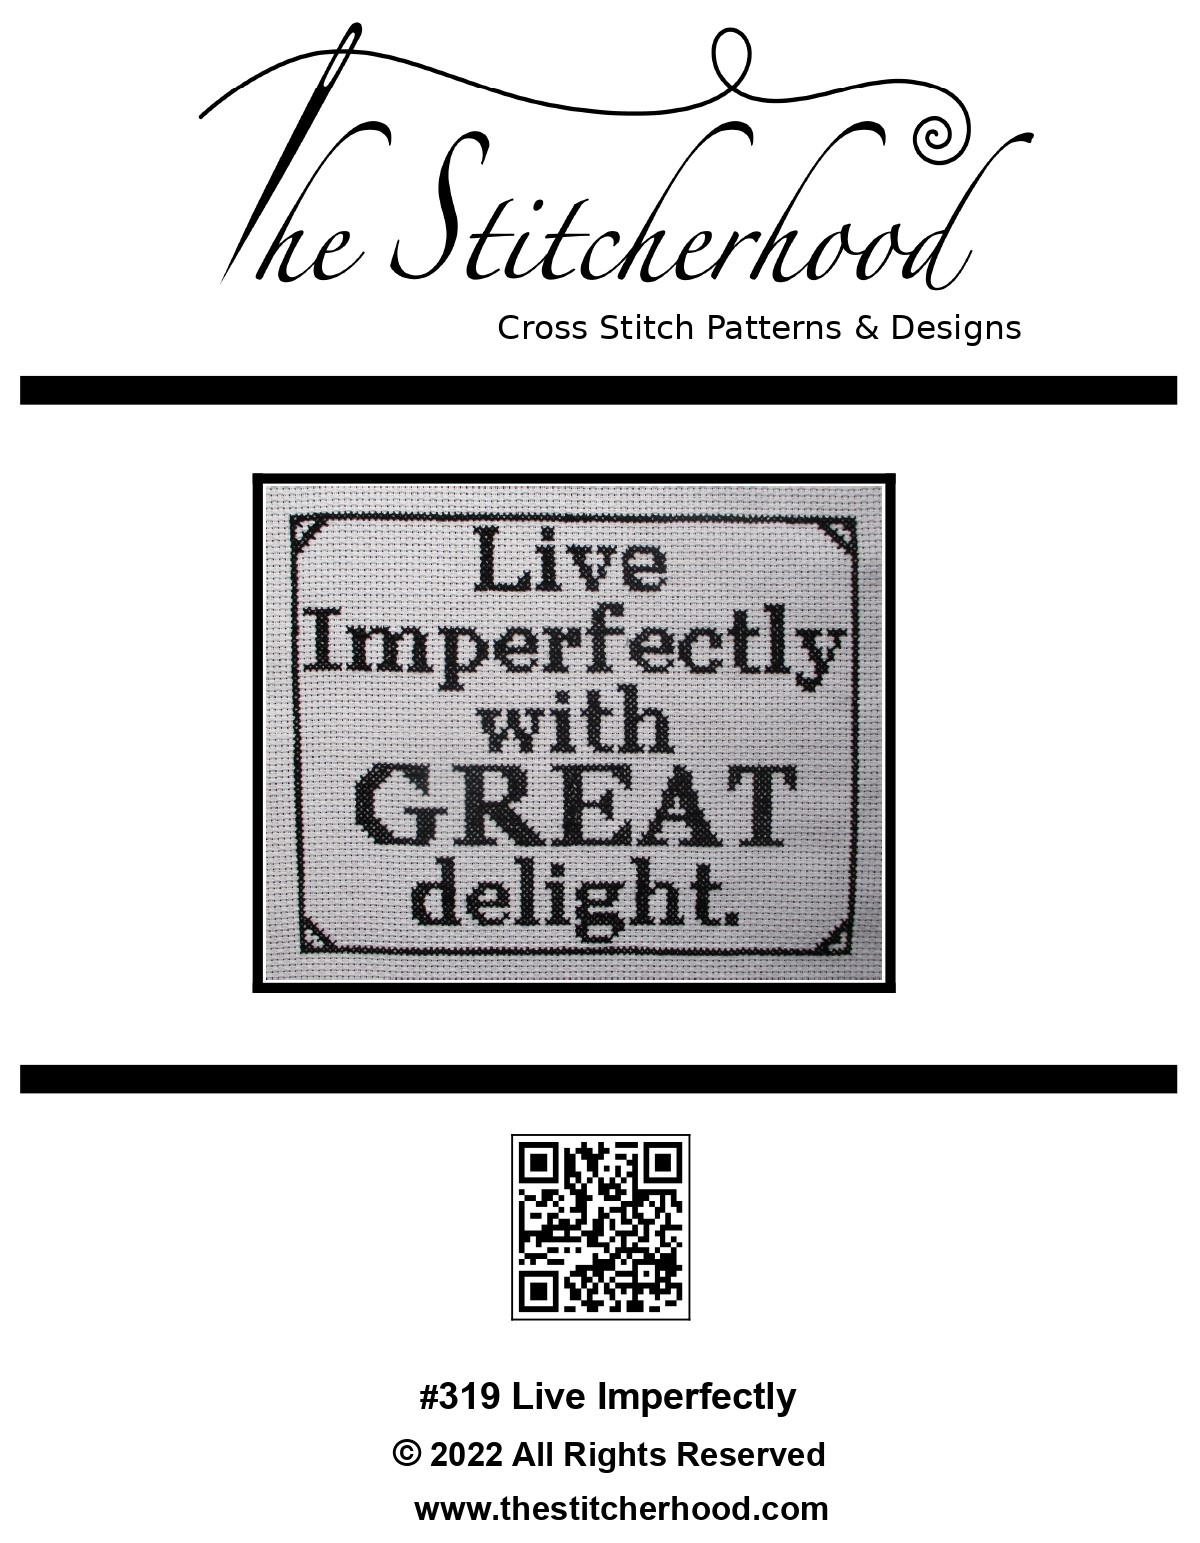 Live Imperfectly funny Cross Stitch Pattern Funny Design Humorous